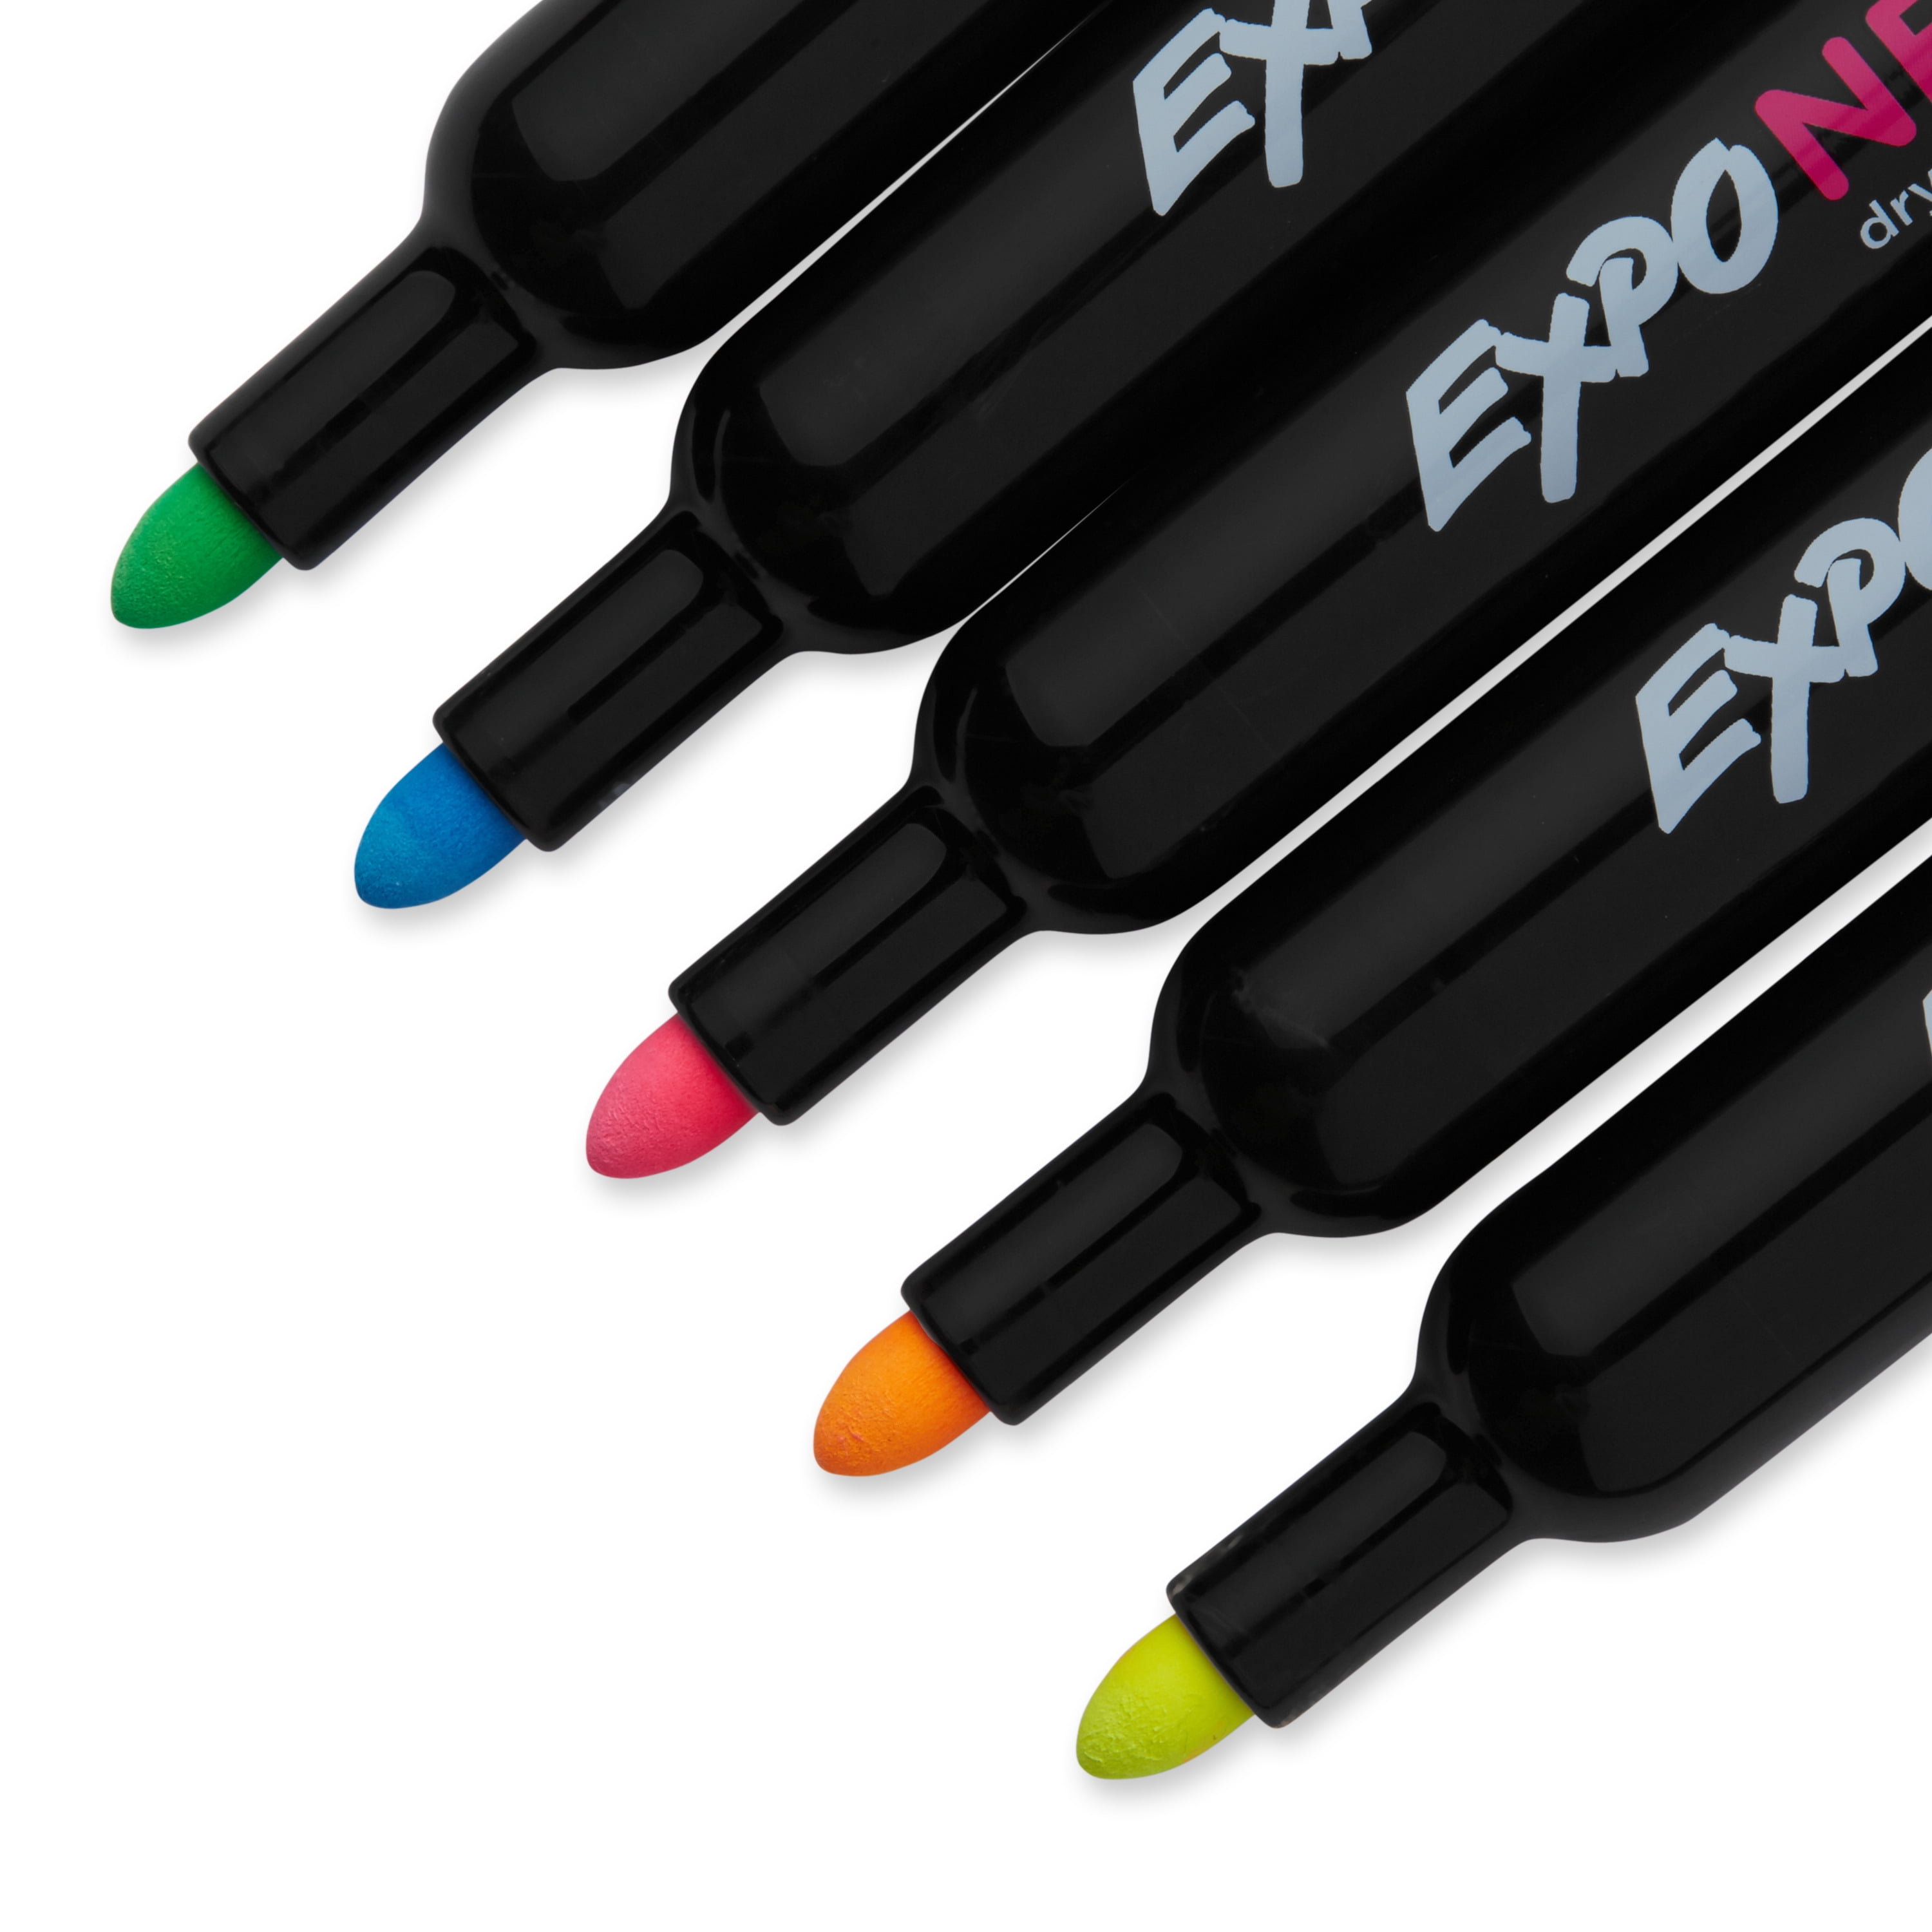 Glass Board Bullet Tip Neon Markers by ACCO Brands Corporation